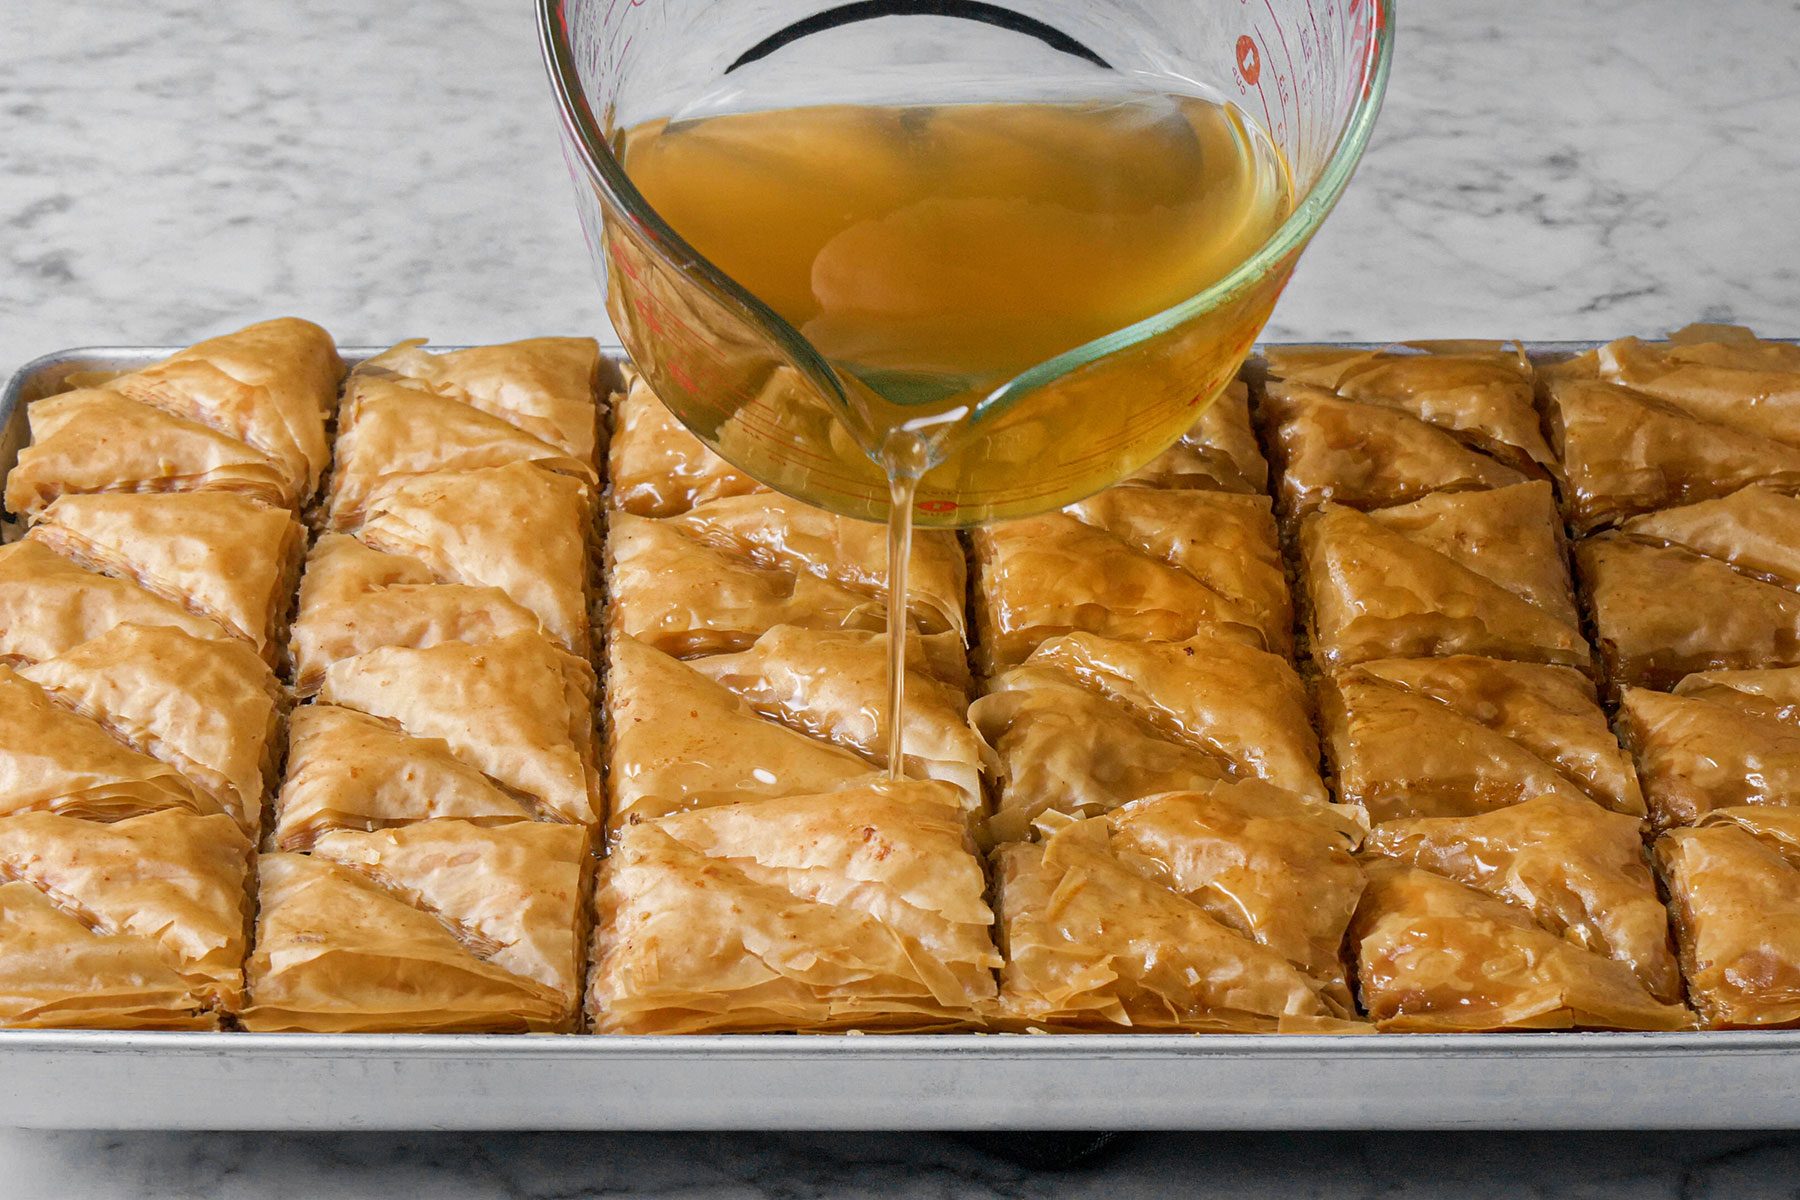 Pouring the syrup over Baklava 